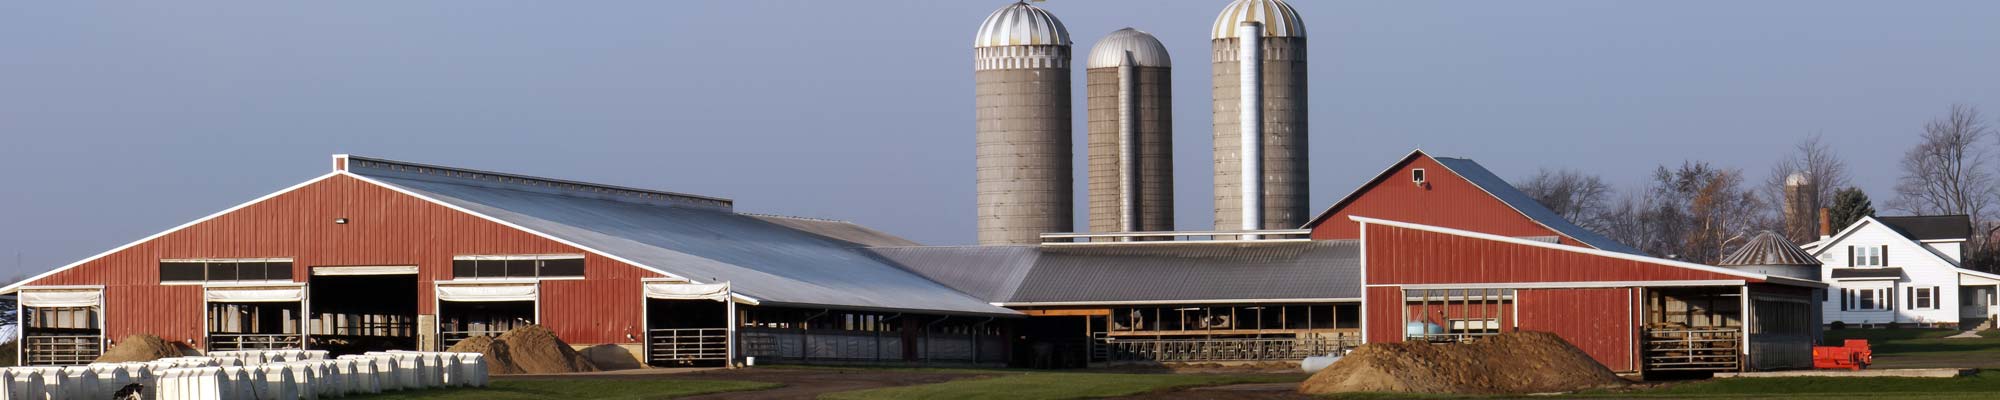 Dairy farm with red barn, white house, calf hutches, and machinery in the yard